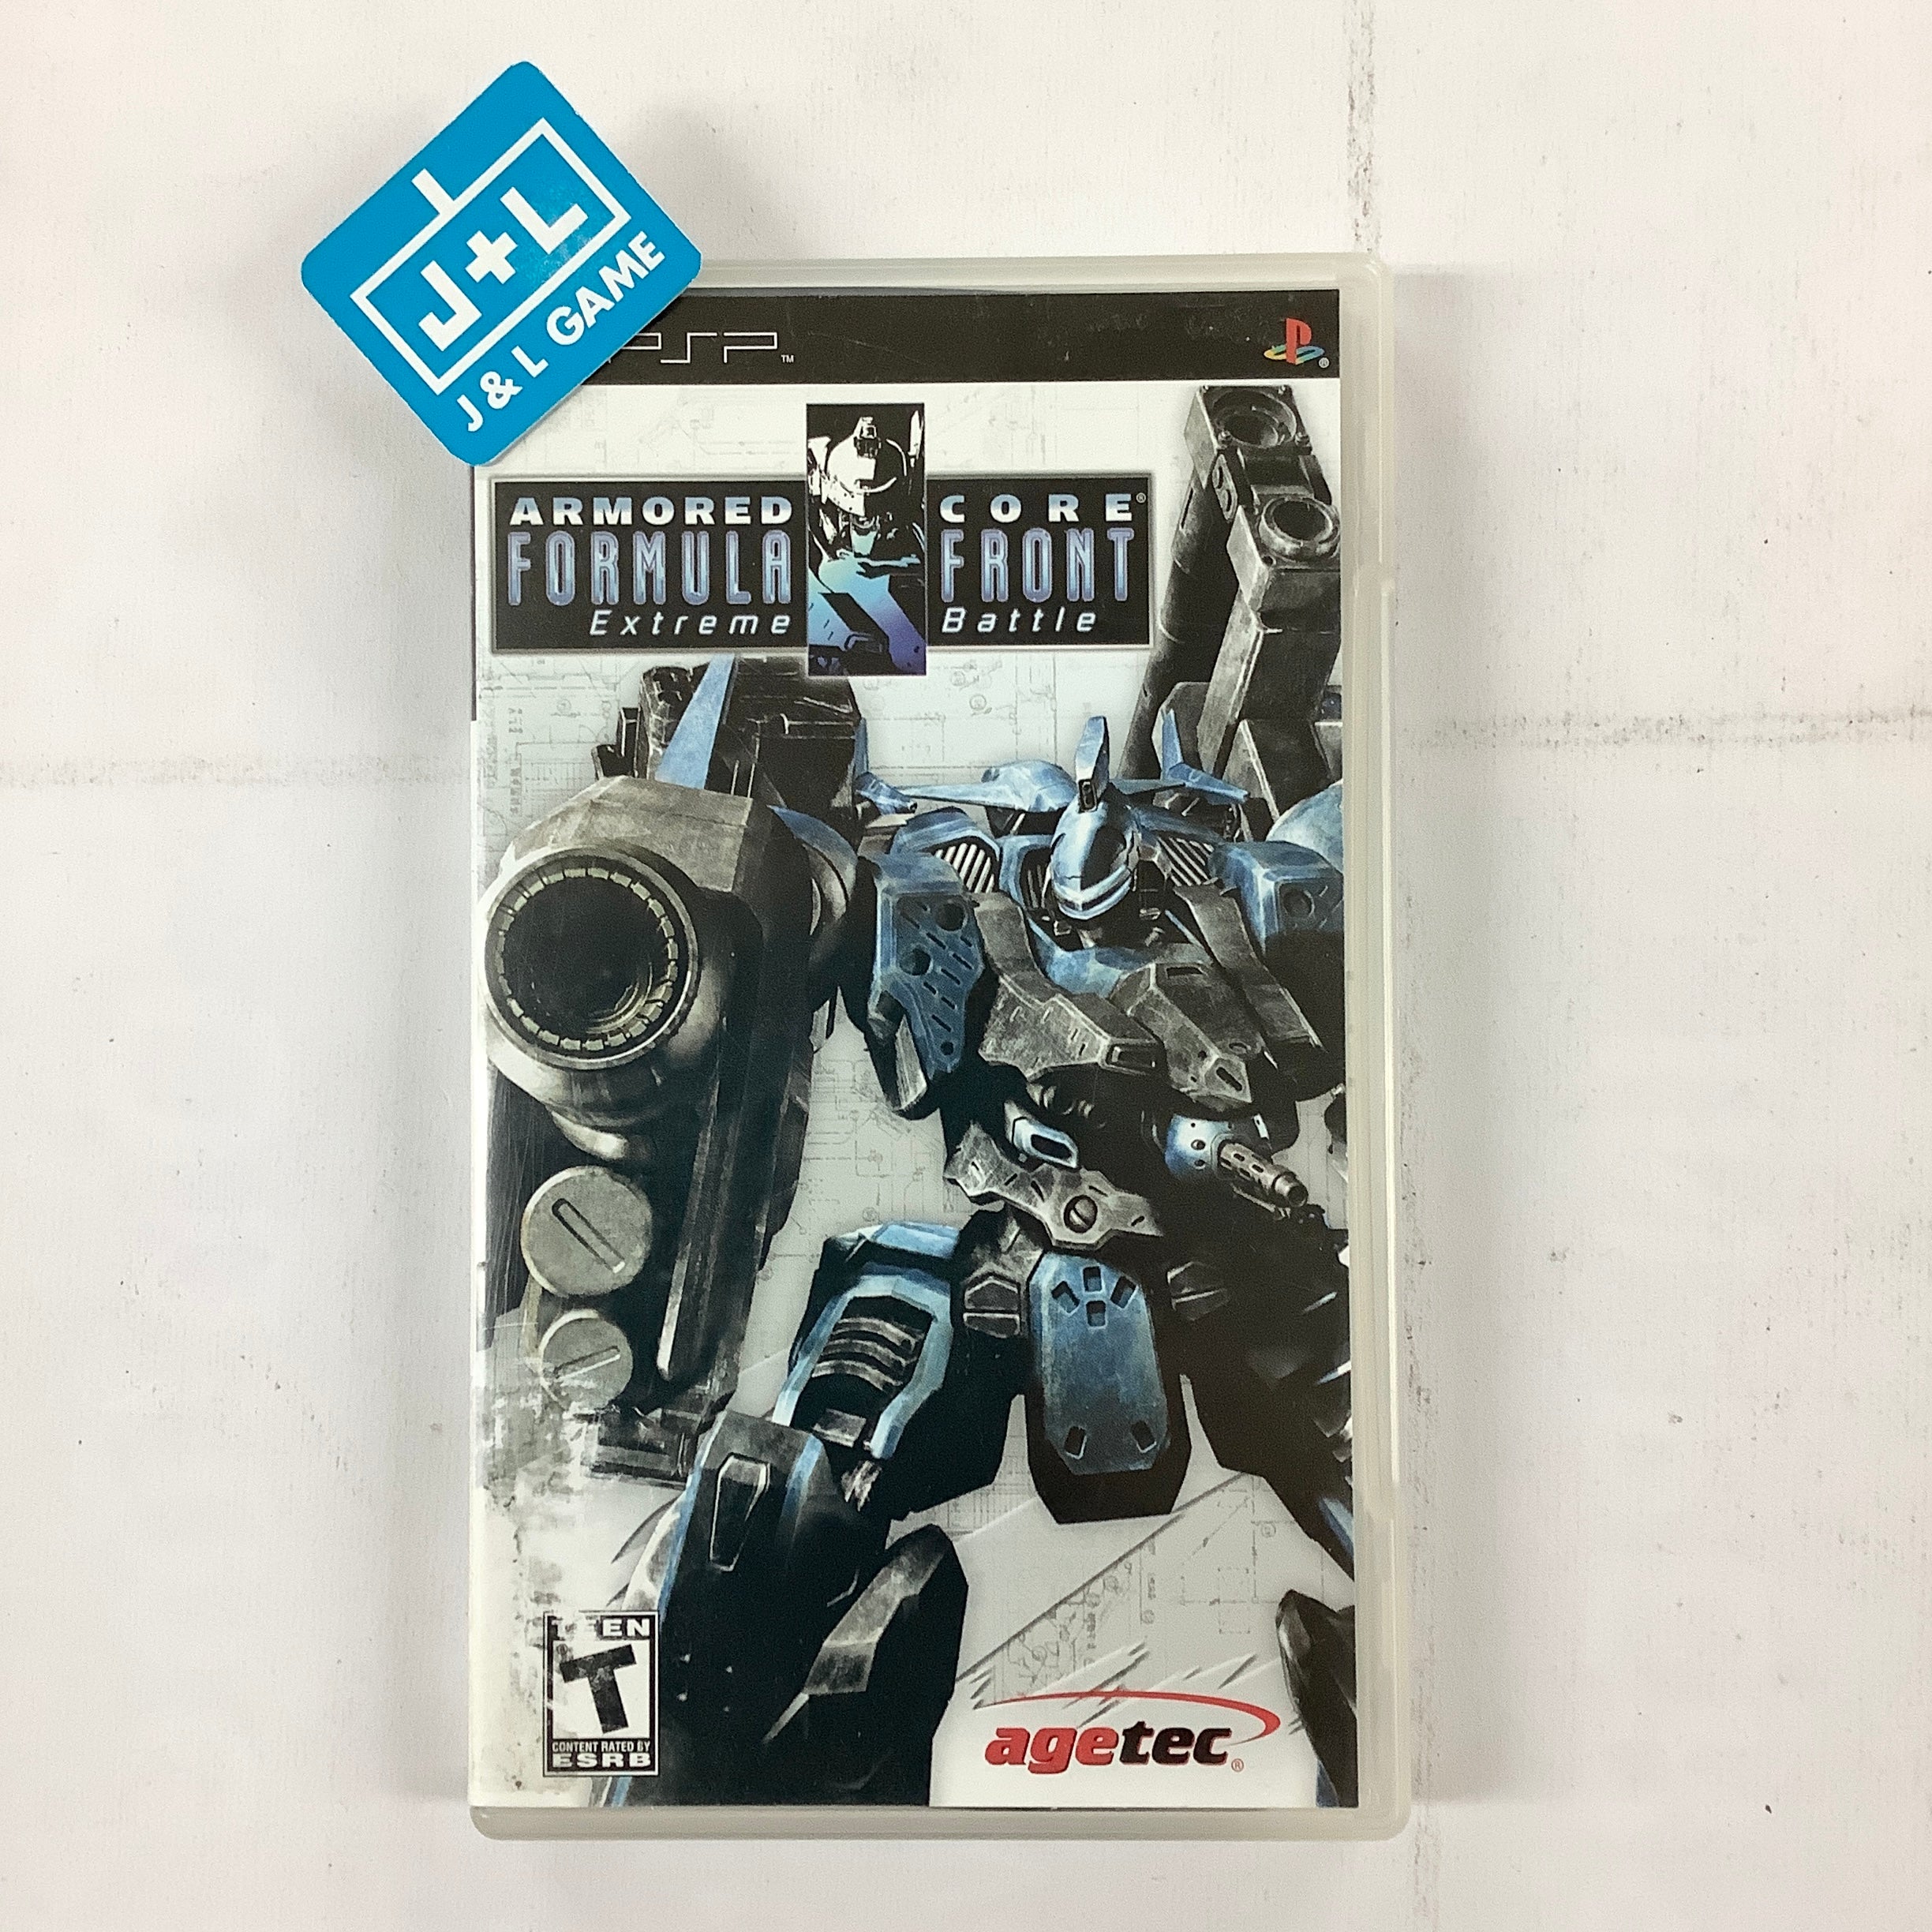 Armored Core: Formula Front Extreme Battle - Sony PSP [Pre-Owned] Video Games Agetec   